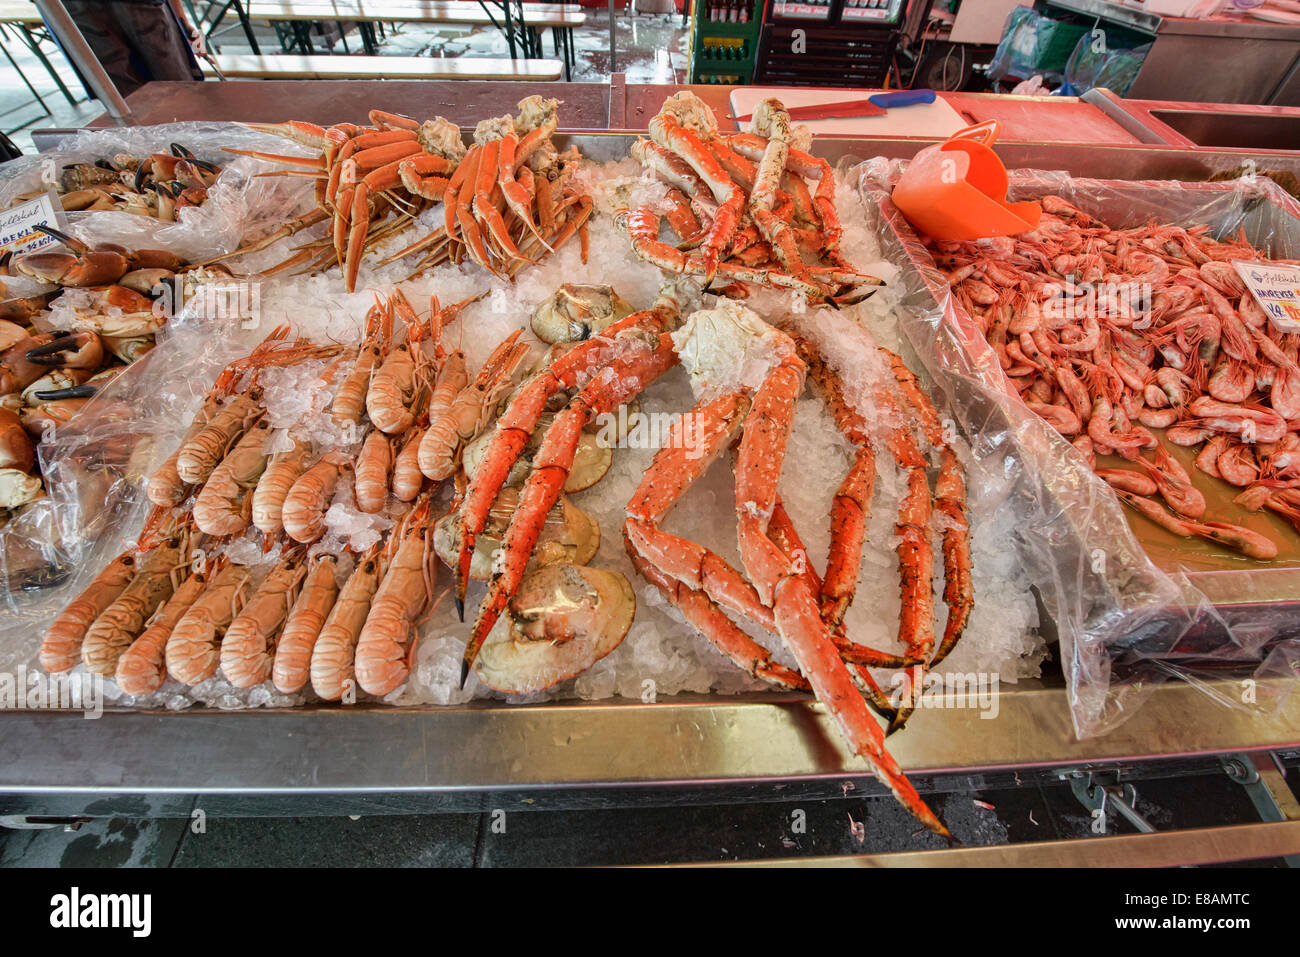 giant shrimp and lobster in the seafood market in Bergen, Norway ...